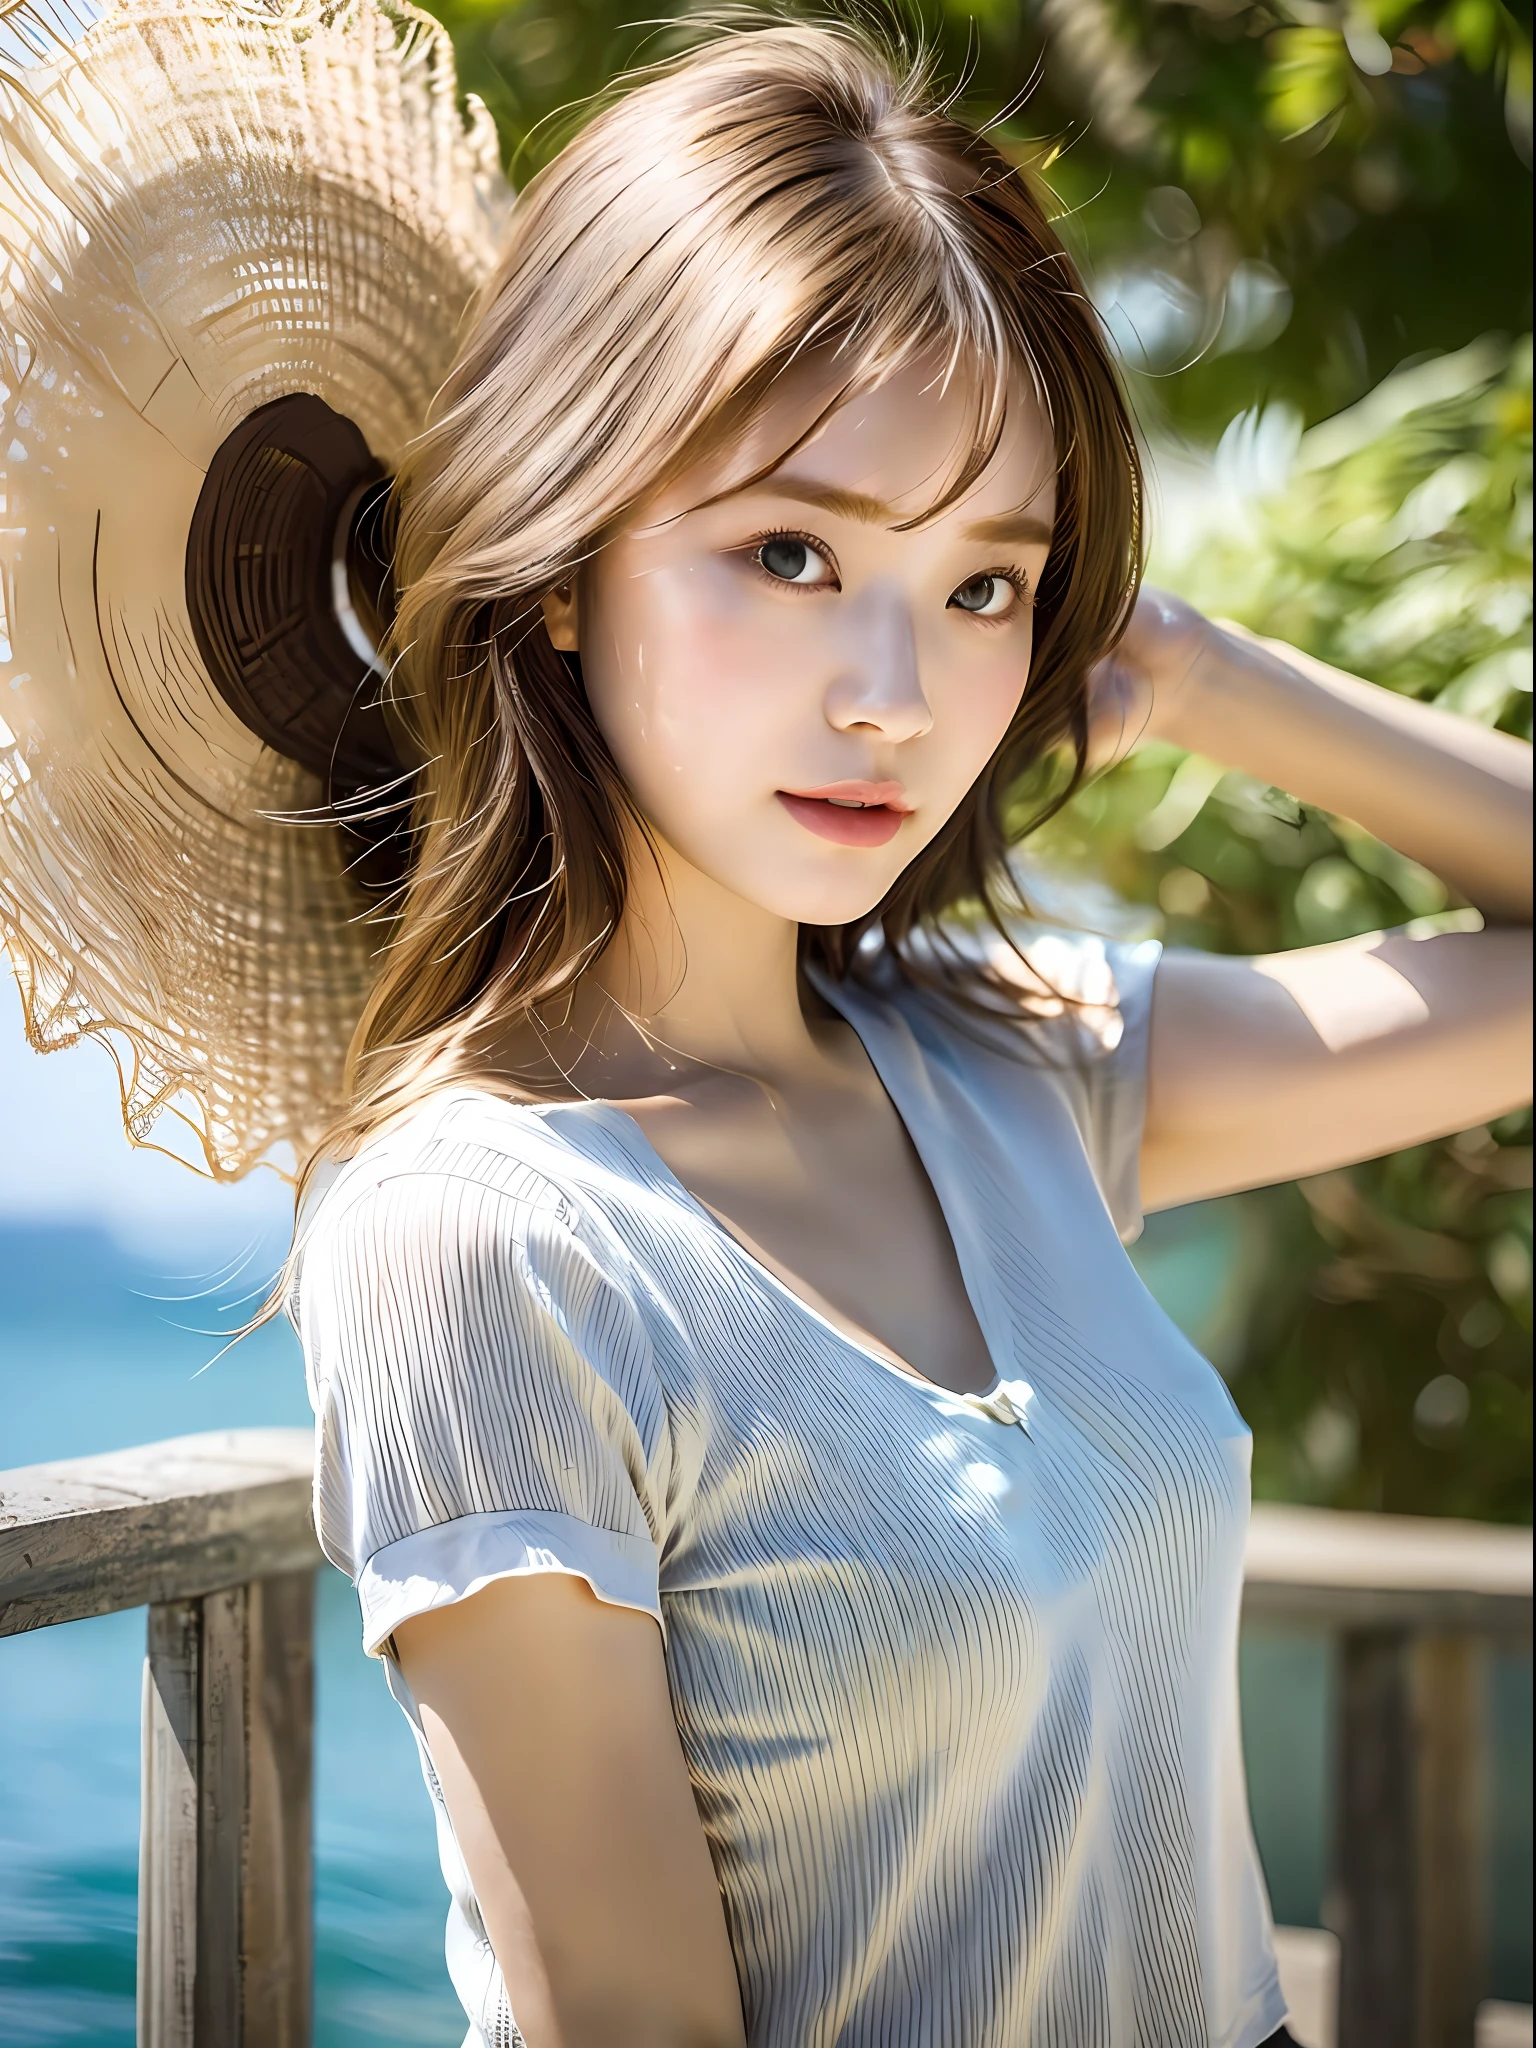 (8k, highest quality, masterpiece: 1.2), (hair_style), (realistic, photorealistic: 1.37), plump eyes, highest quality, masterpiece, in the summer sun, sky and sea background, shot on wooden deck, [small breasts], backlit, shooting from the waist up, camera angle from below, pose with hair raked up with hands, shot in natural light from morning to noon, Hairstyles and fashion styles that match the Japan trends of 2023, realistic, super detailed, 30s, actress, half Japanese and Russian half model, elaborate CG, slender, adorable, hairstyle matches the fashion of Japan in 2023 layer cut that flutters in the wind, delicate skin type, fine details and softness, model hair color is bright and soft, Choose a short-length T-shirt that matches the summer trends of 2023 and pair it with pale pastel colors for surf fashion.